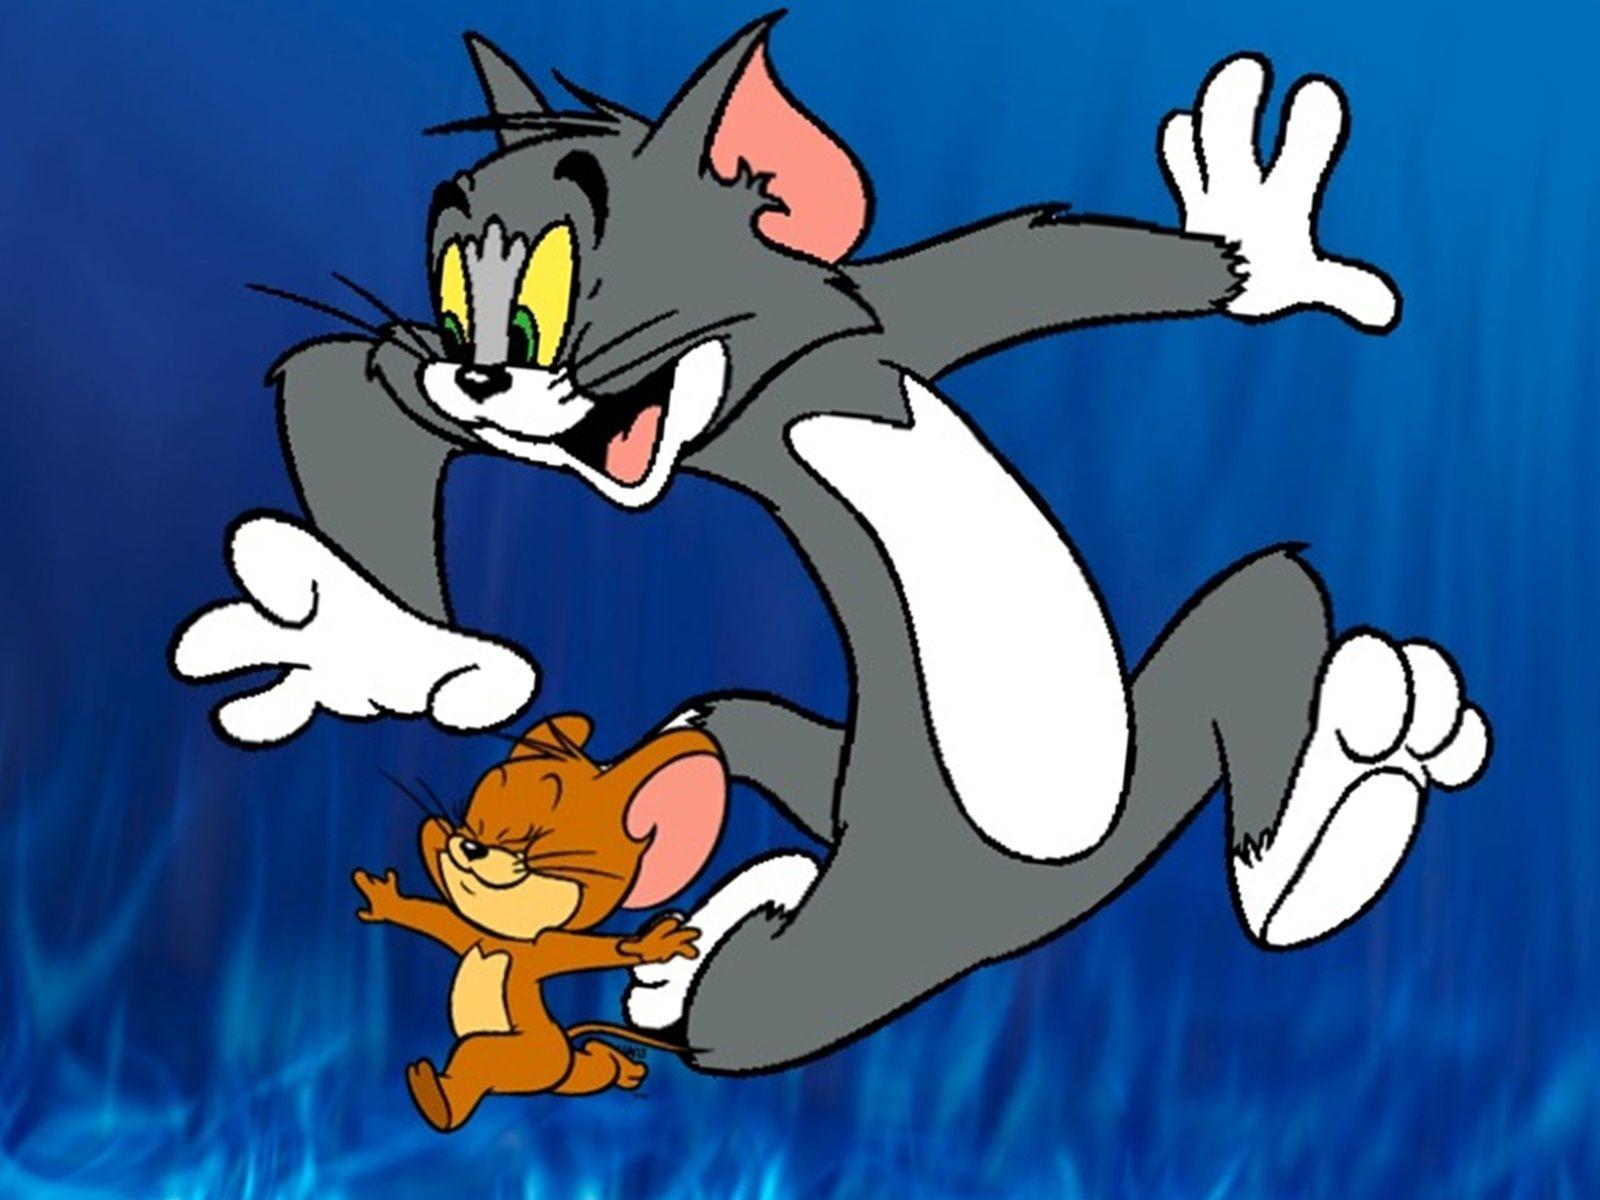 Tom and Jerry 4K Wallpapers - Top Free Tom and Jerry 4K Backgrounds